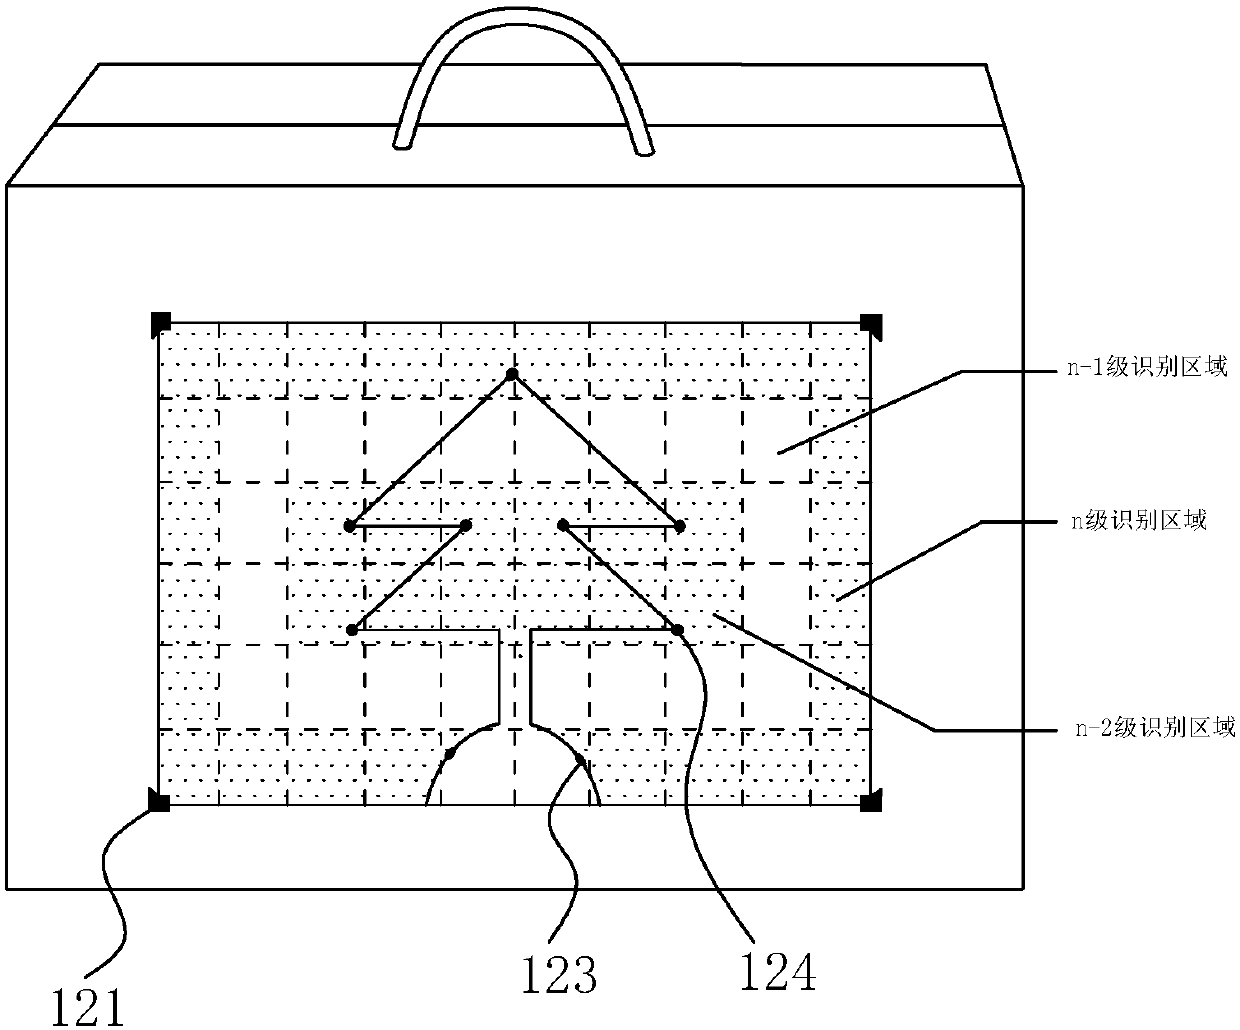 Information transmission system based on image recognition of packaging box